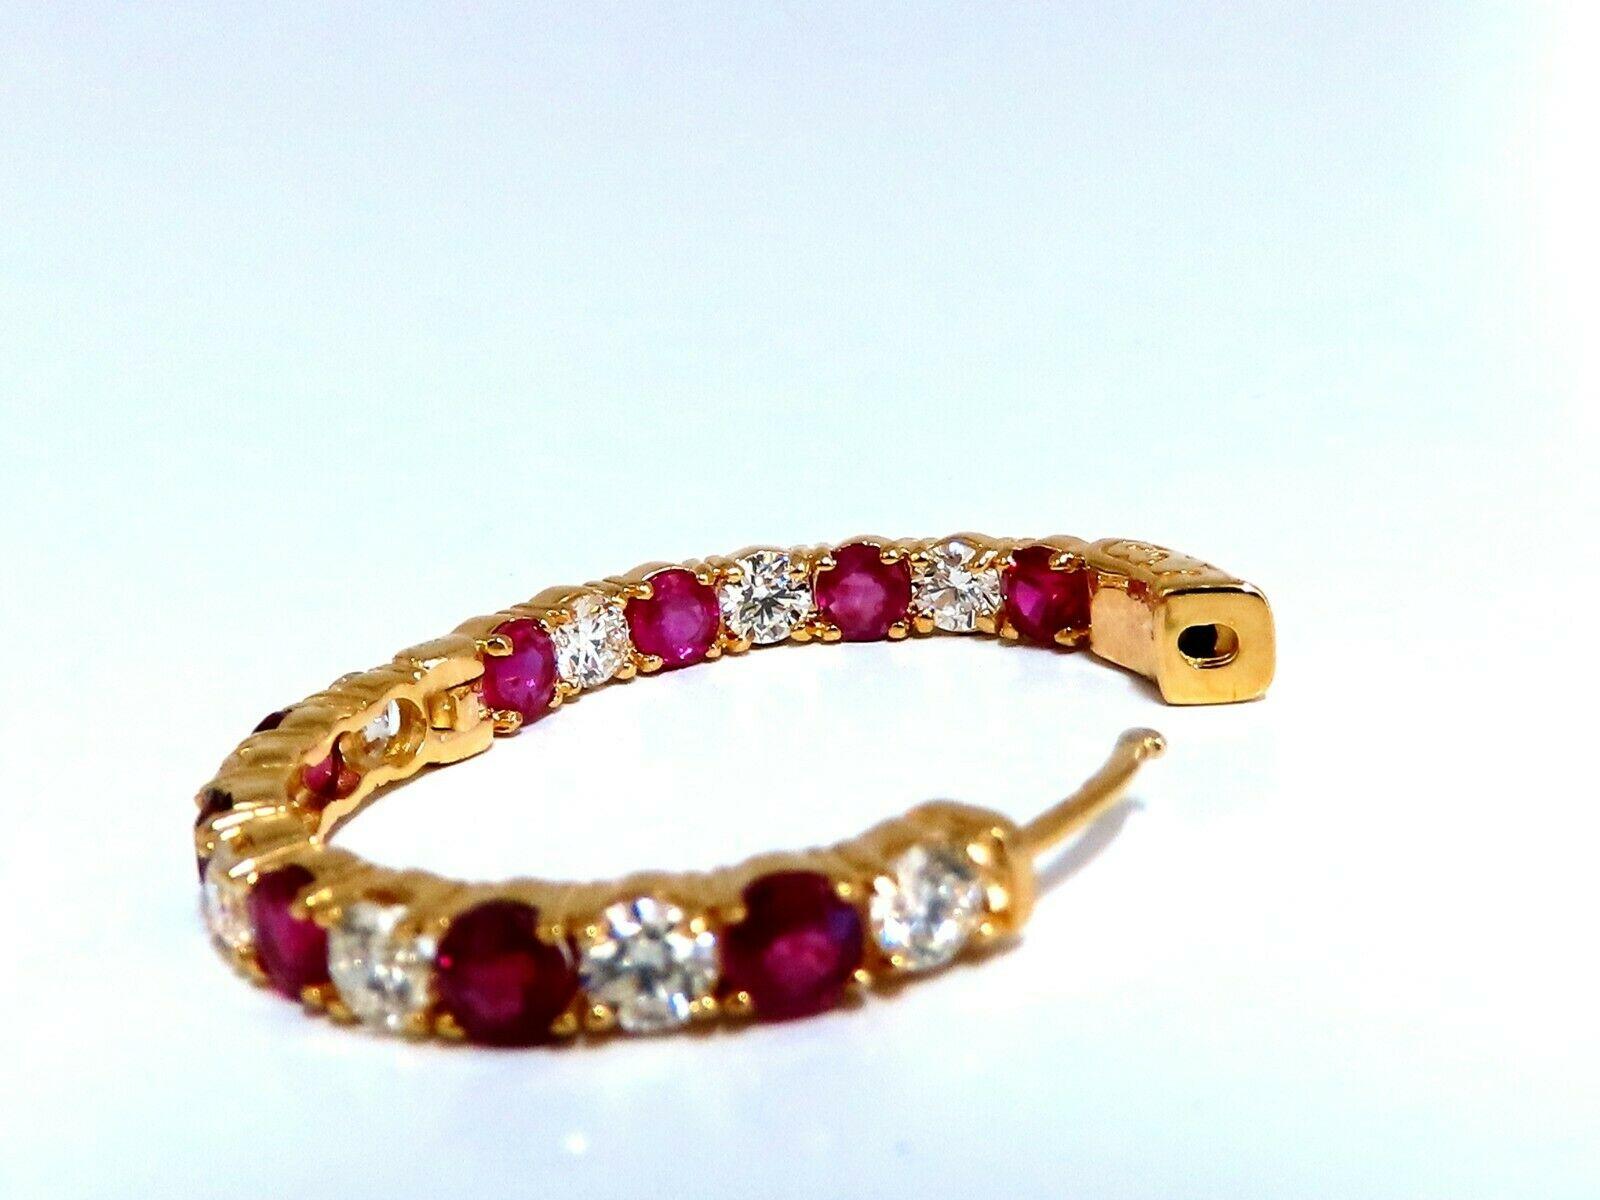 7.19ct Natural Ruby Diamonds Hoop Earrings 14kt Yellow Gold Inside Out For Sale 2